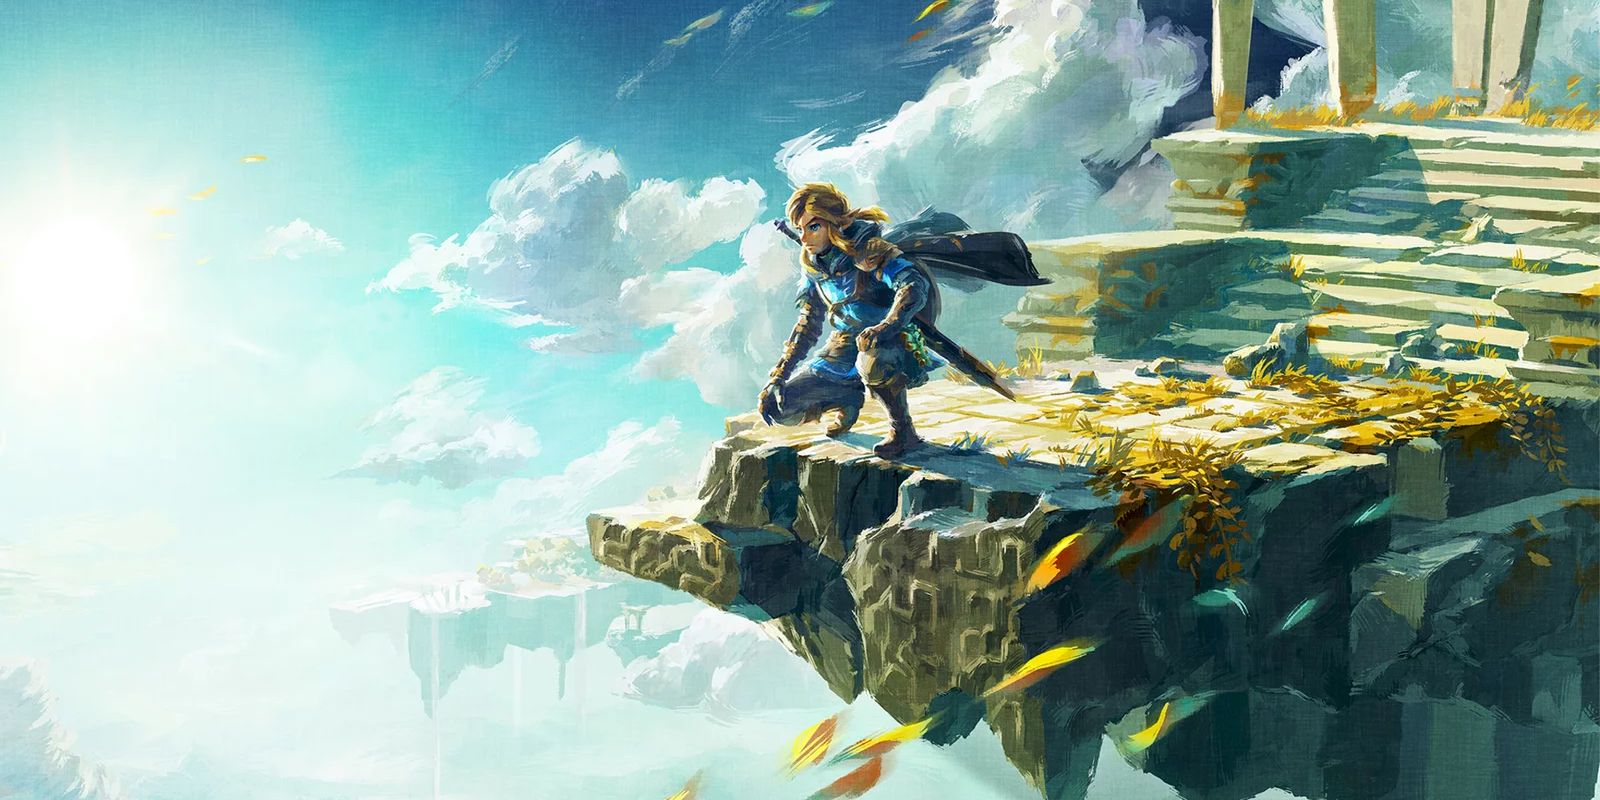 Link kneeling on the edge of an island floating in the sky.